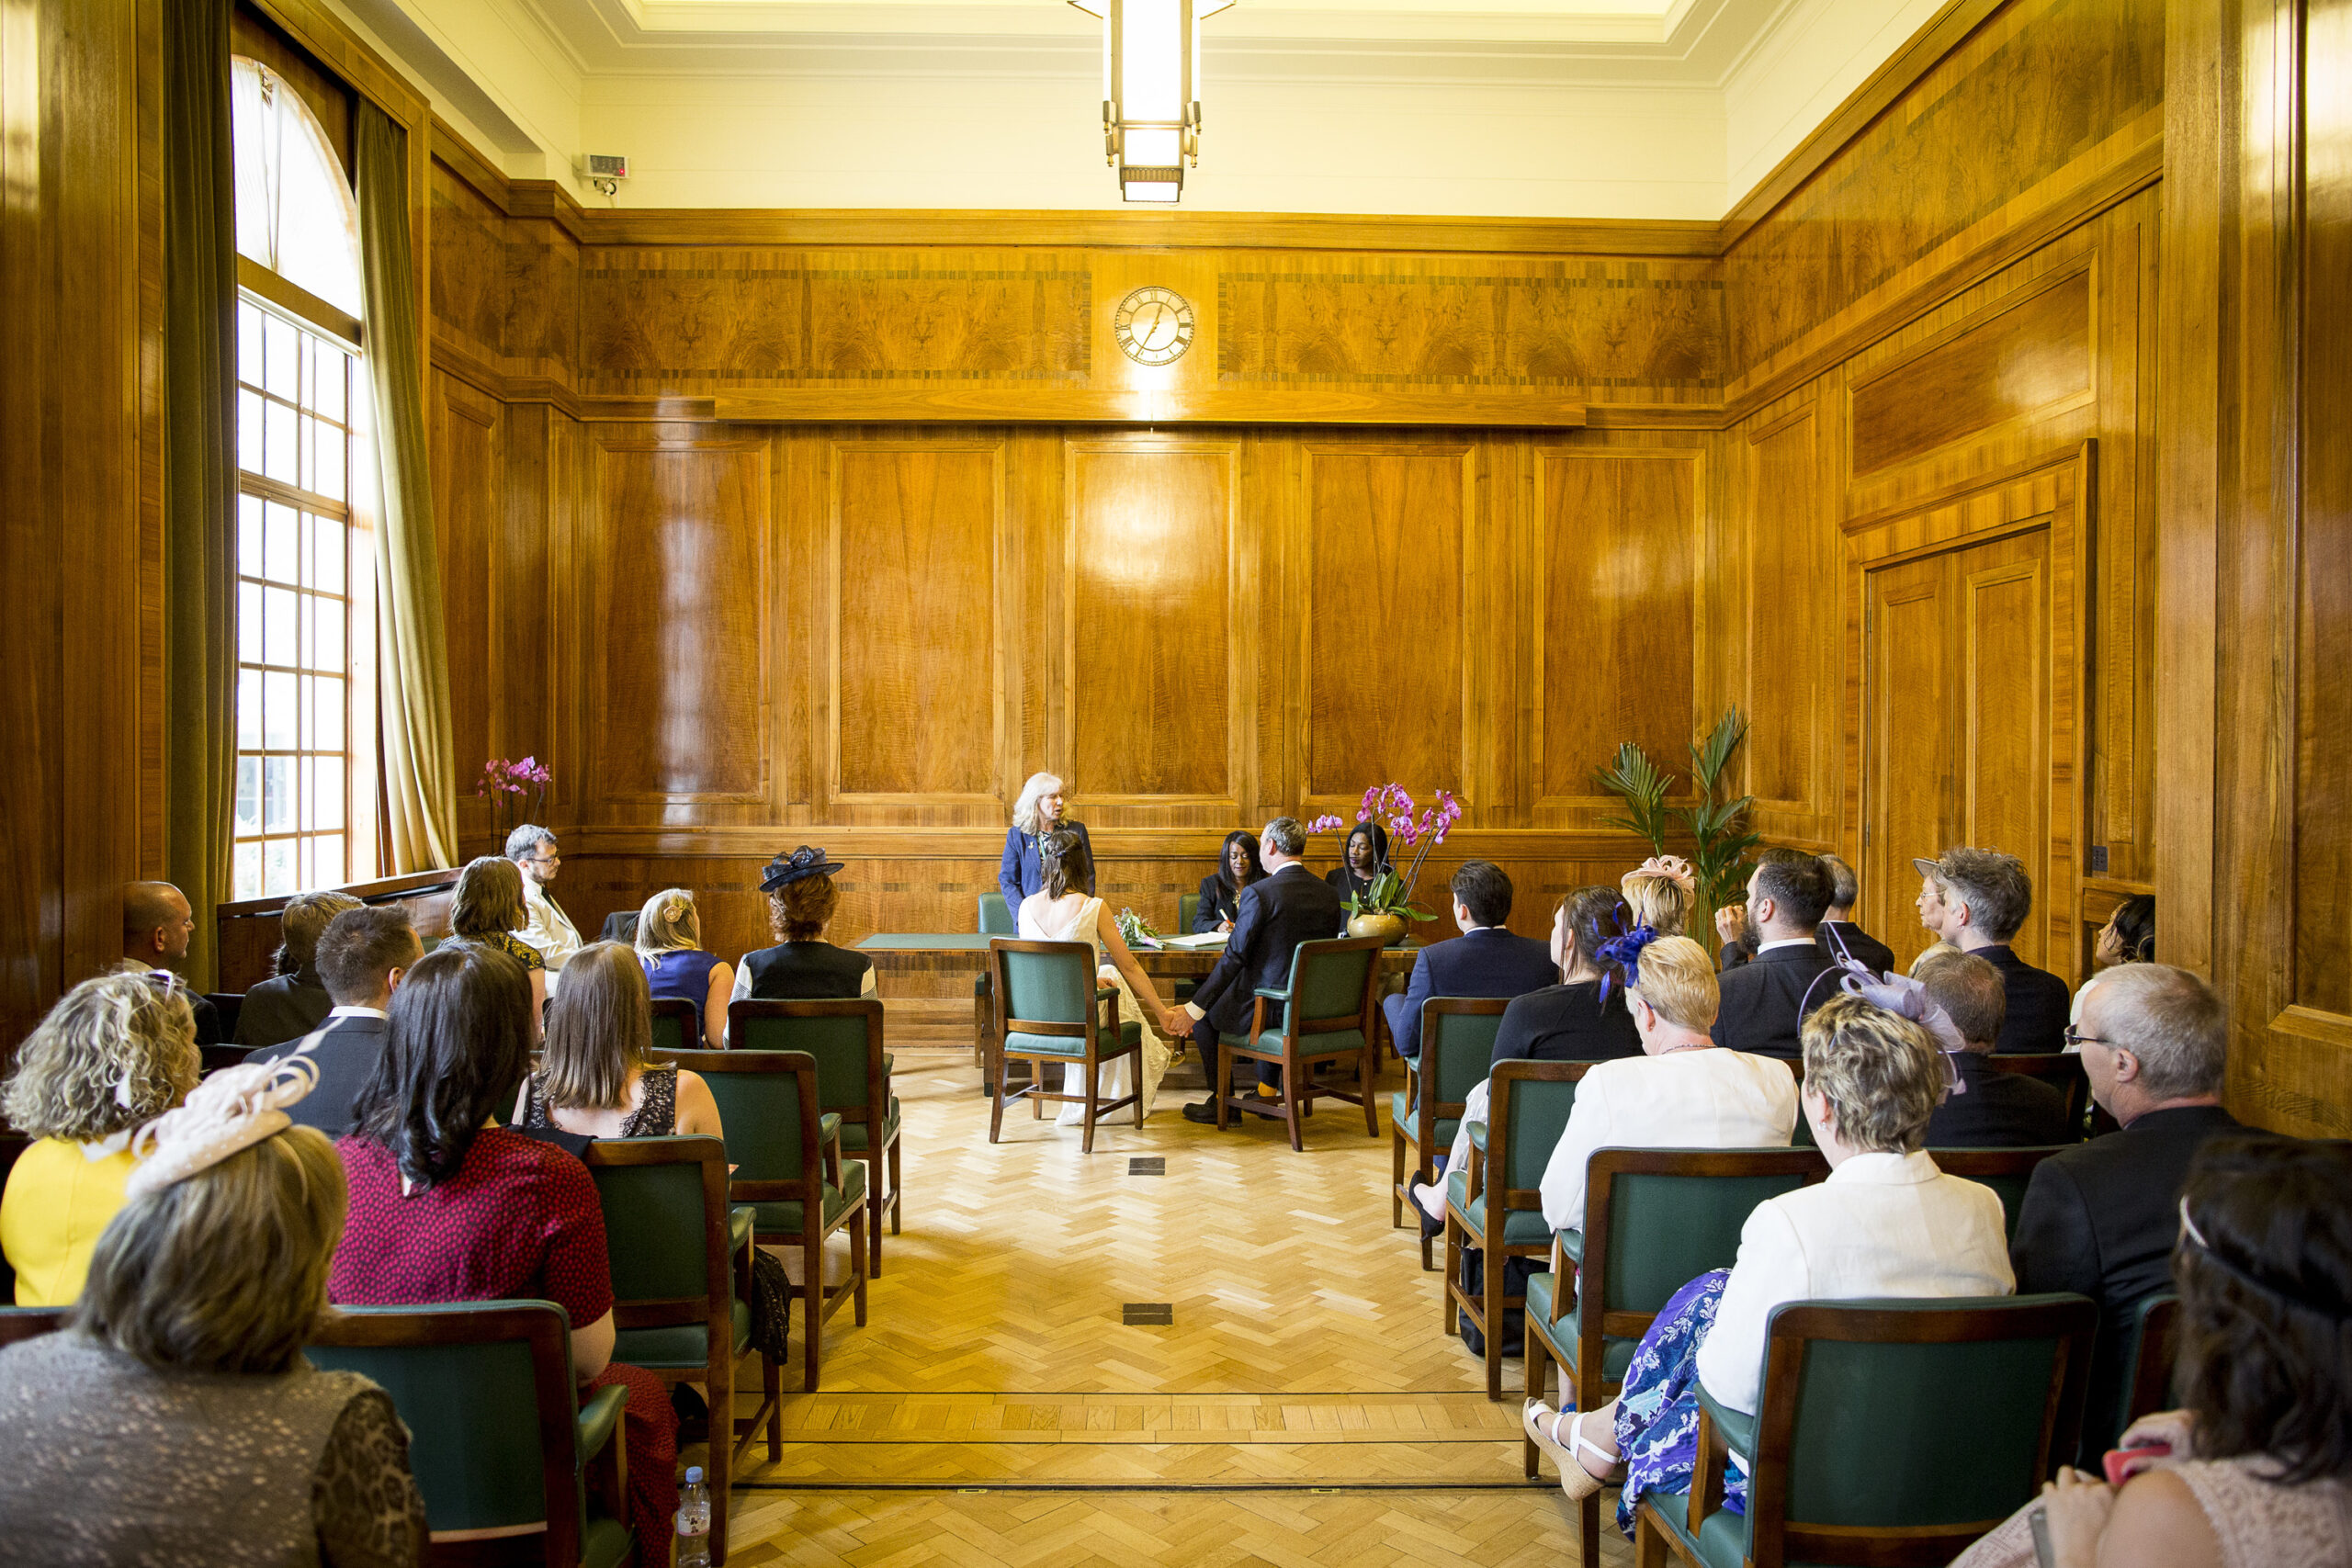 Interior shot of a wedding suite, filled with people watching a wedding ceremony at Hackney Town Hall